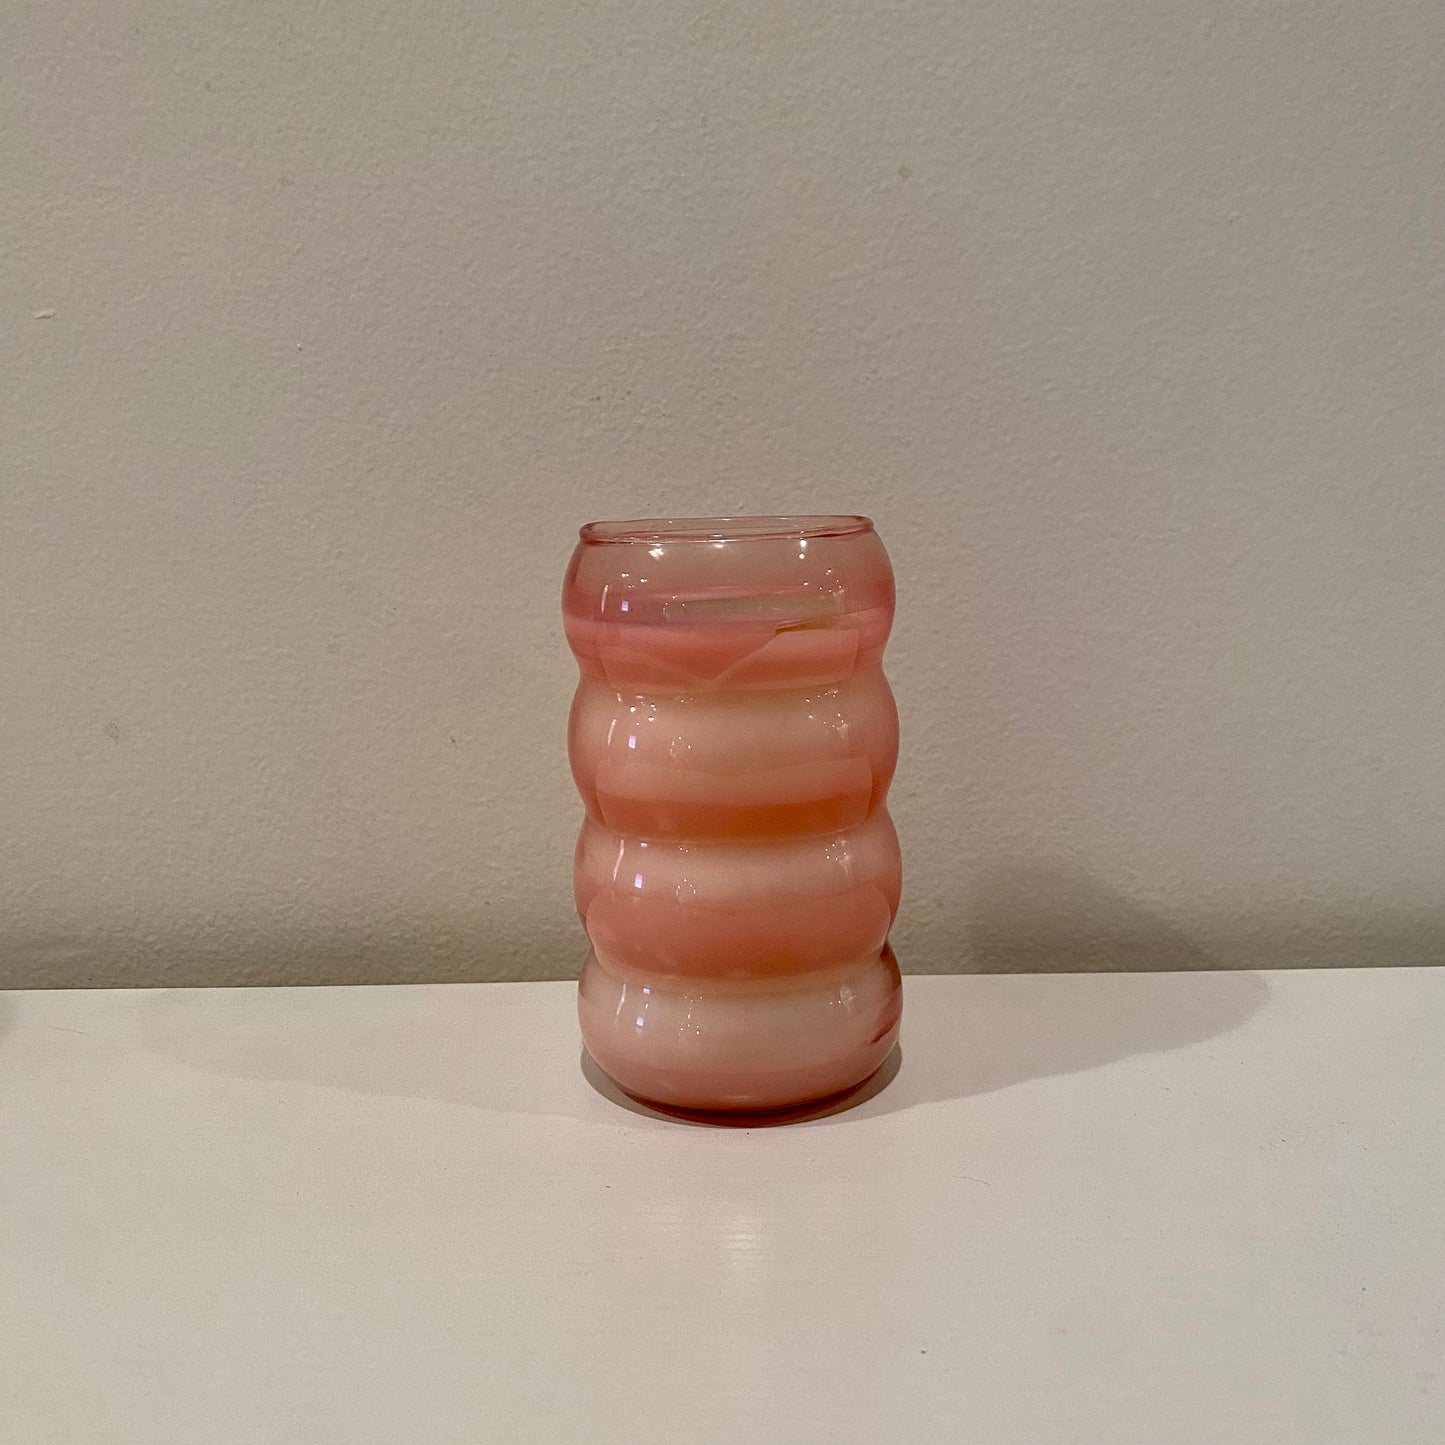 The Pink Retro Soy Wax Candle